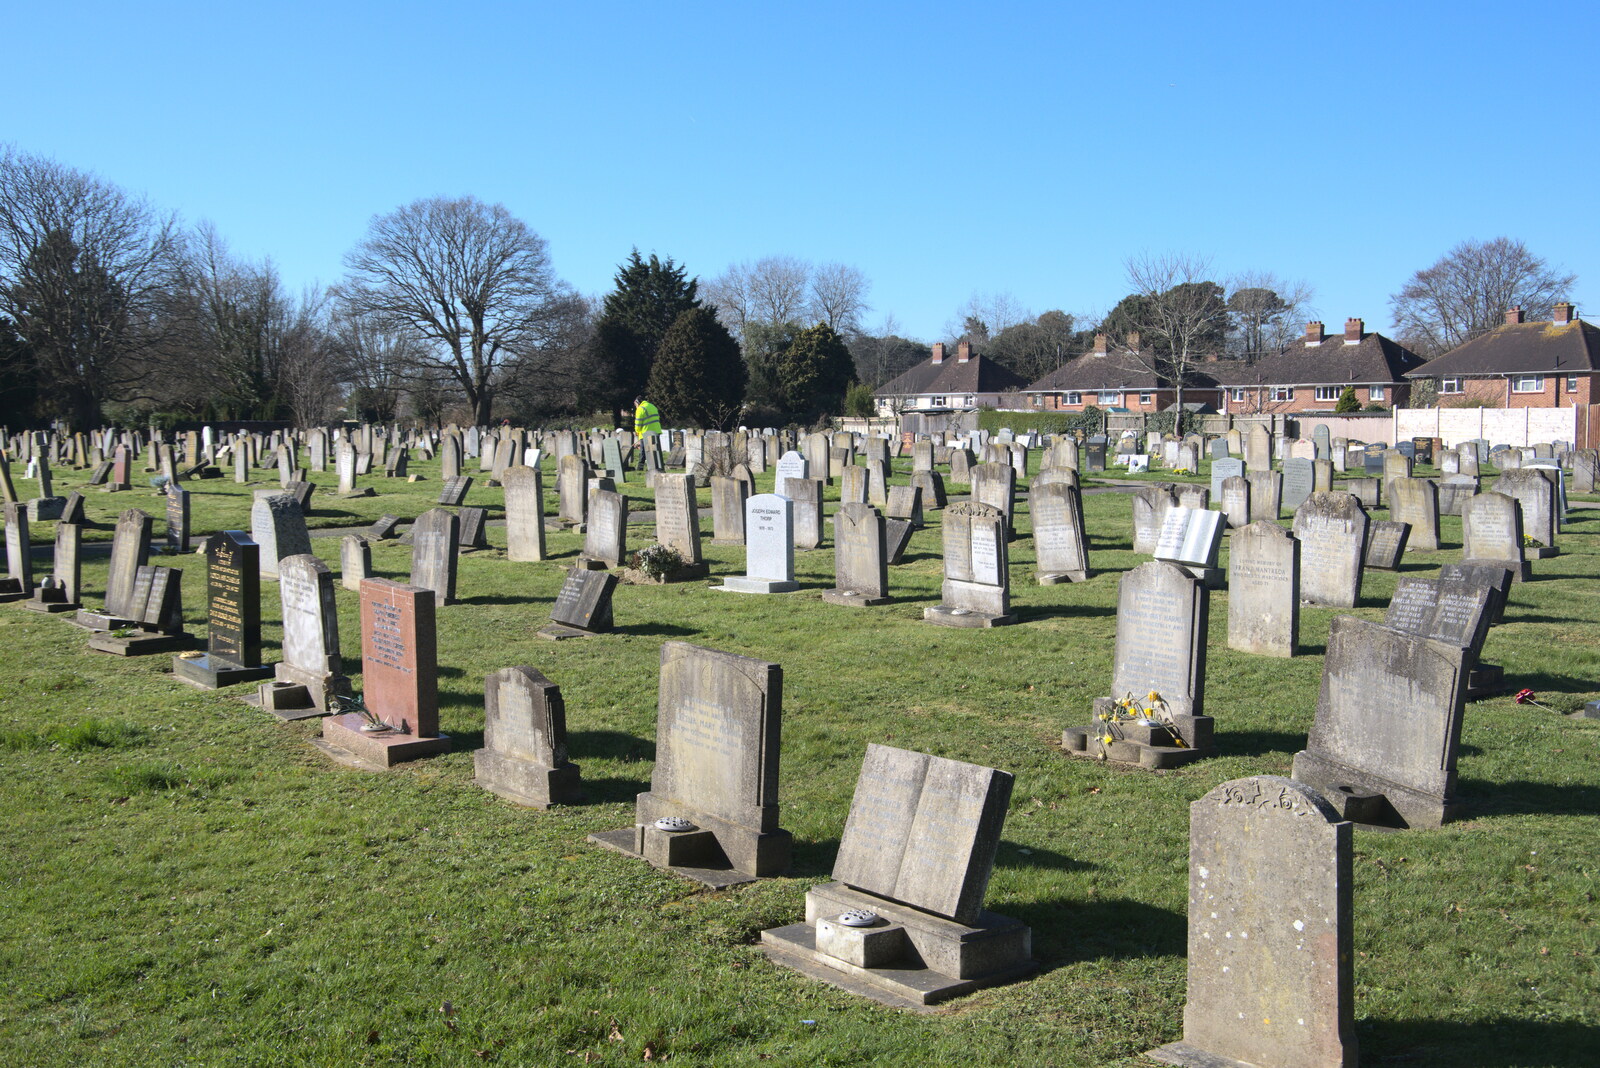 The many gravestones of New Milton's cemetery from A Day in New Milton, Hampshire - 3rd April 2023